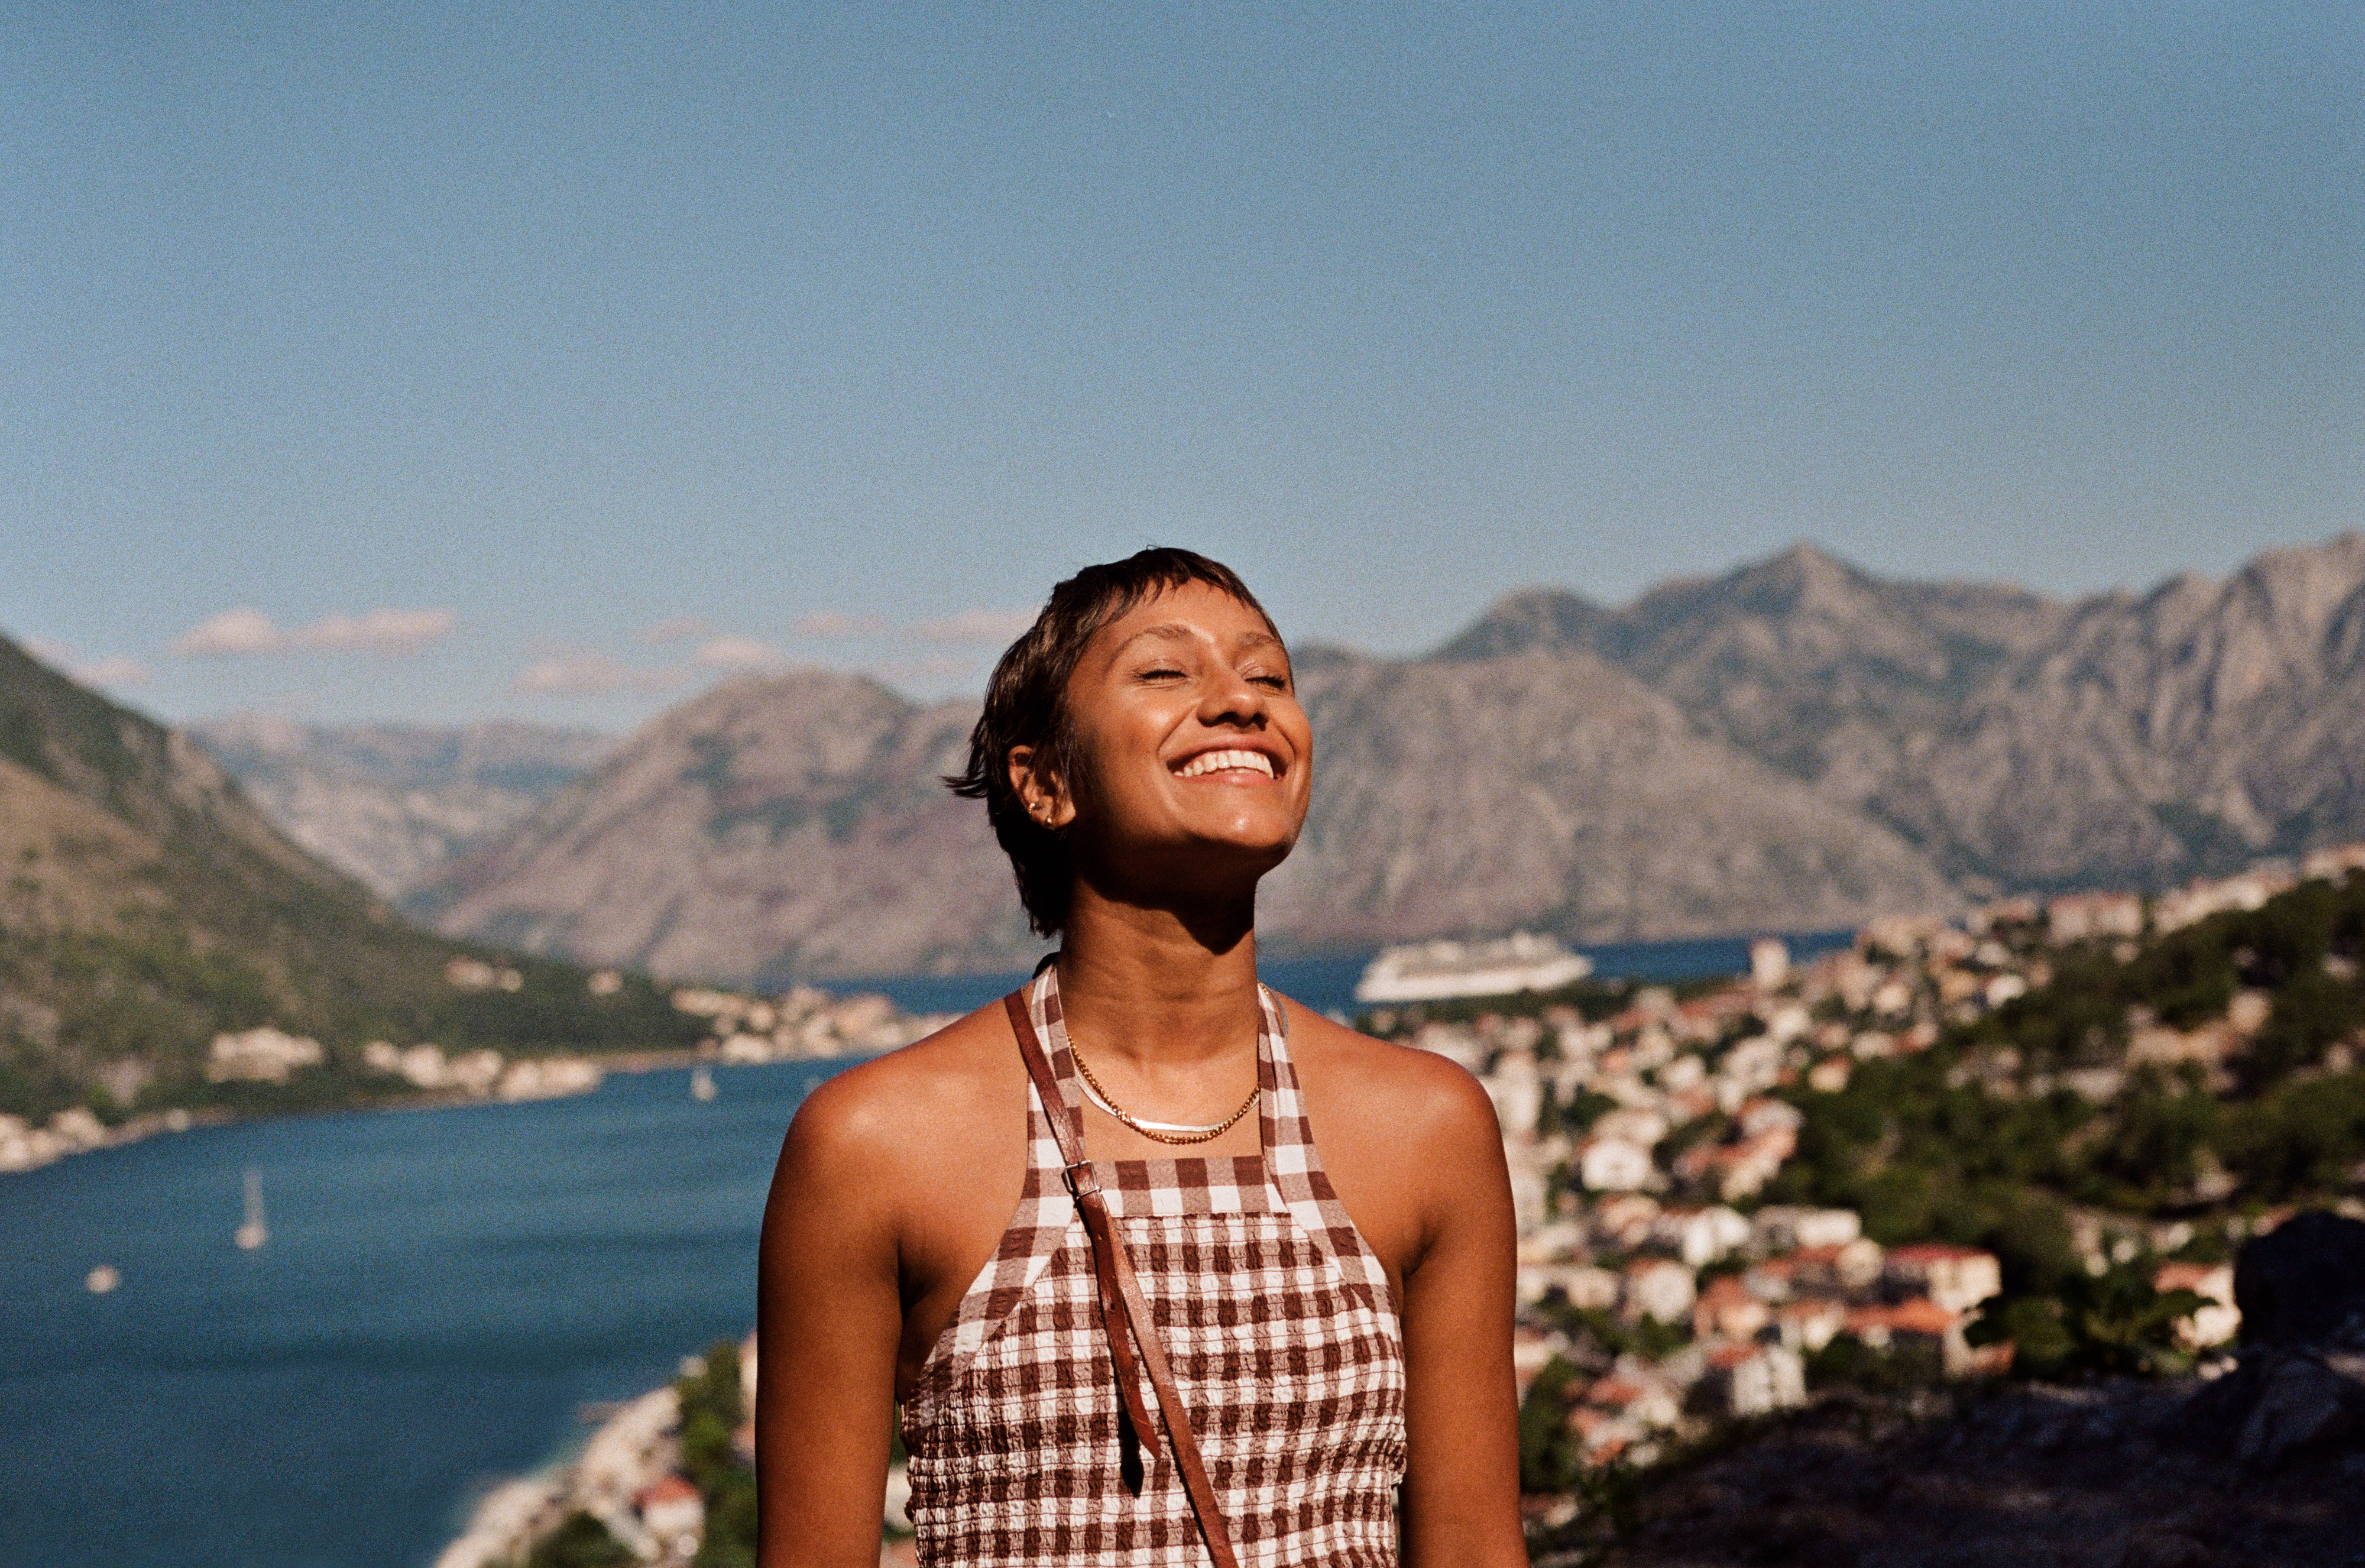 Woman smiling in the sunlight with mountains and a town in the background